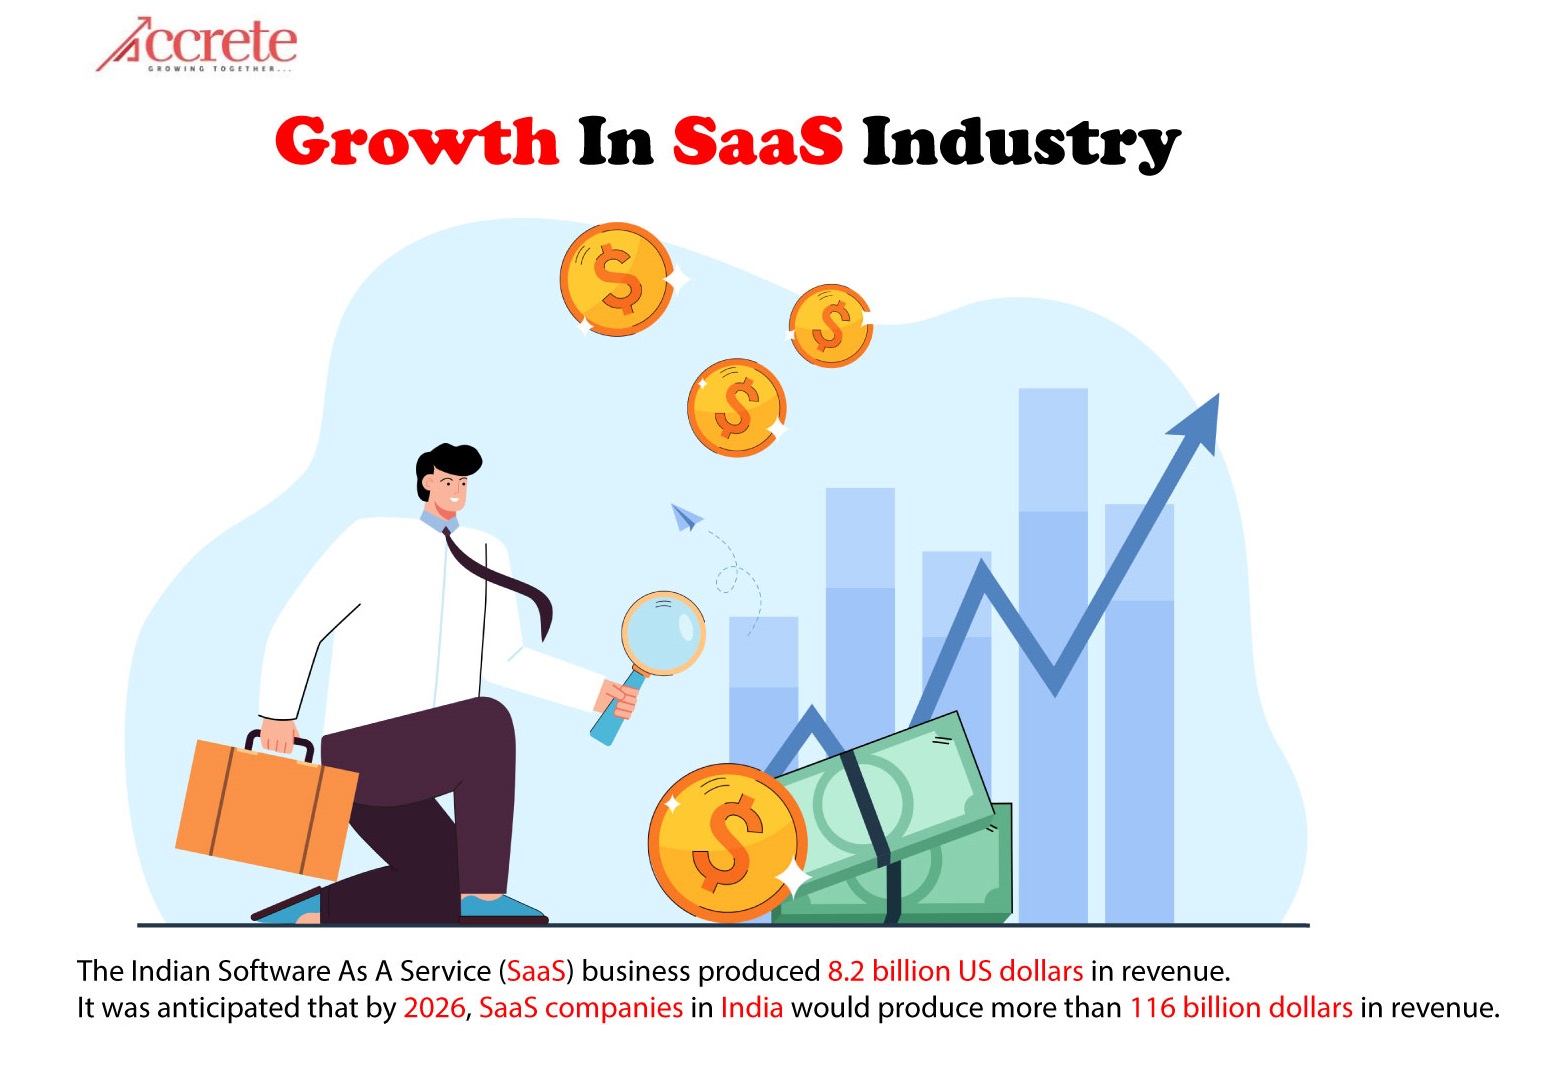 Image showing growth in SaaS Industry in India and Globally